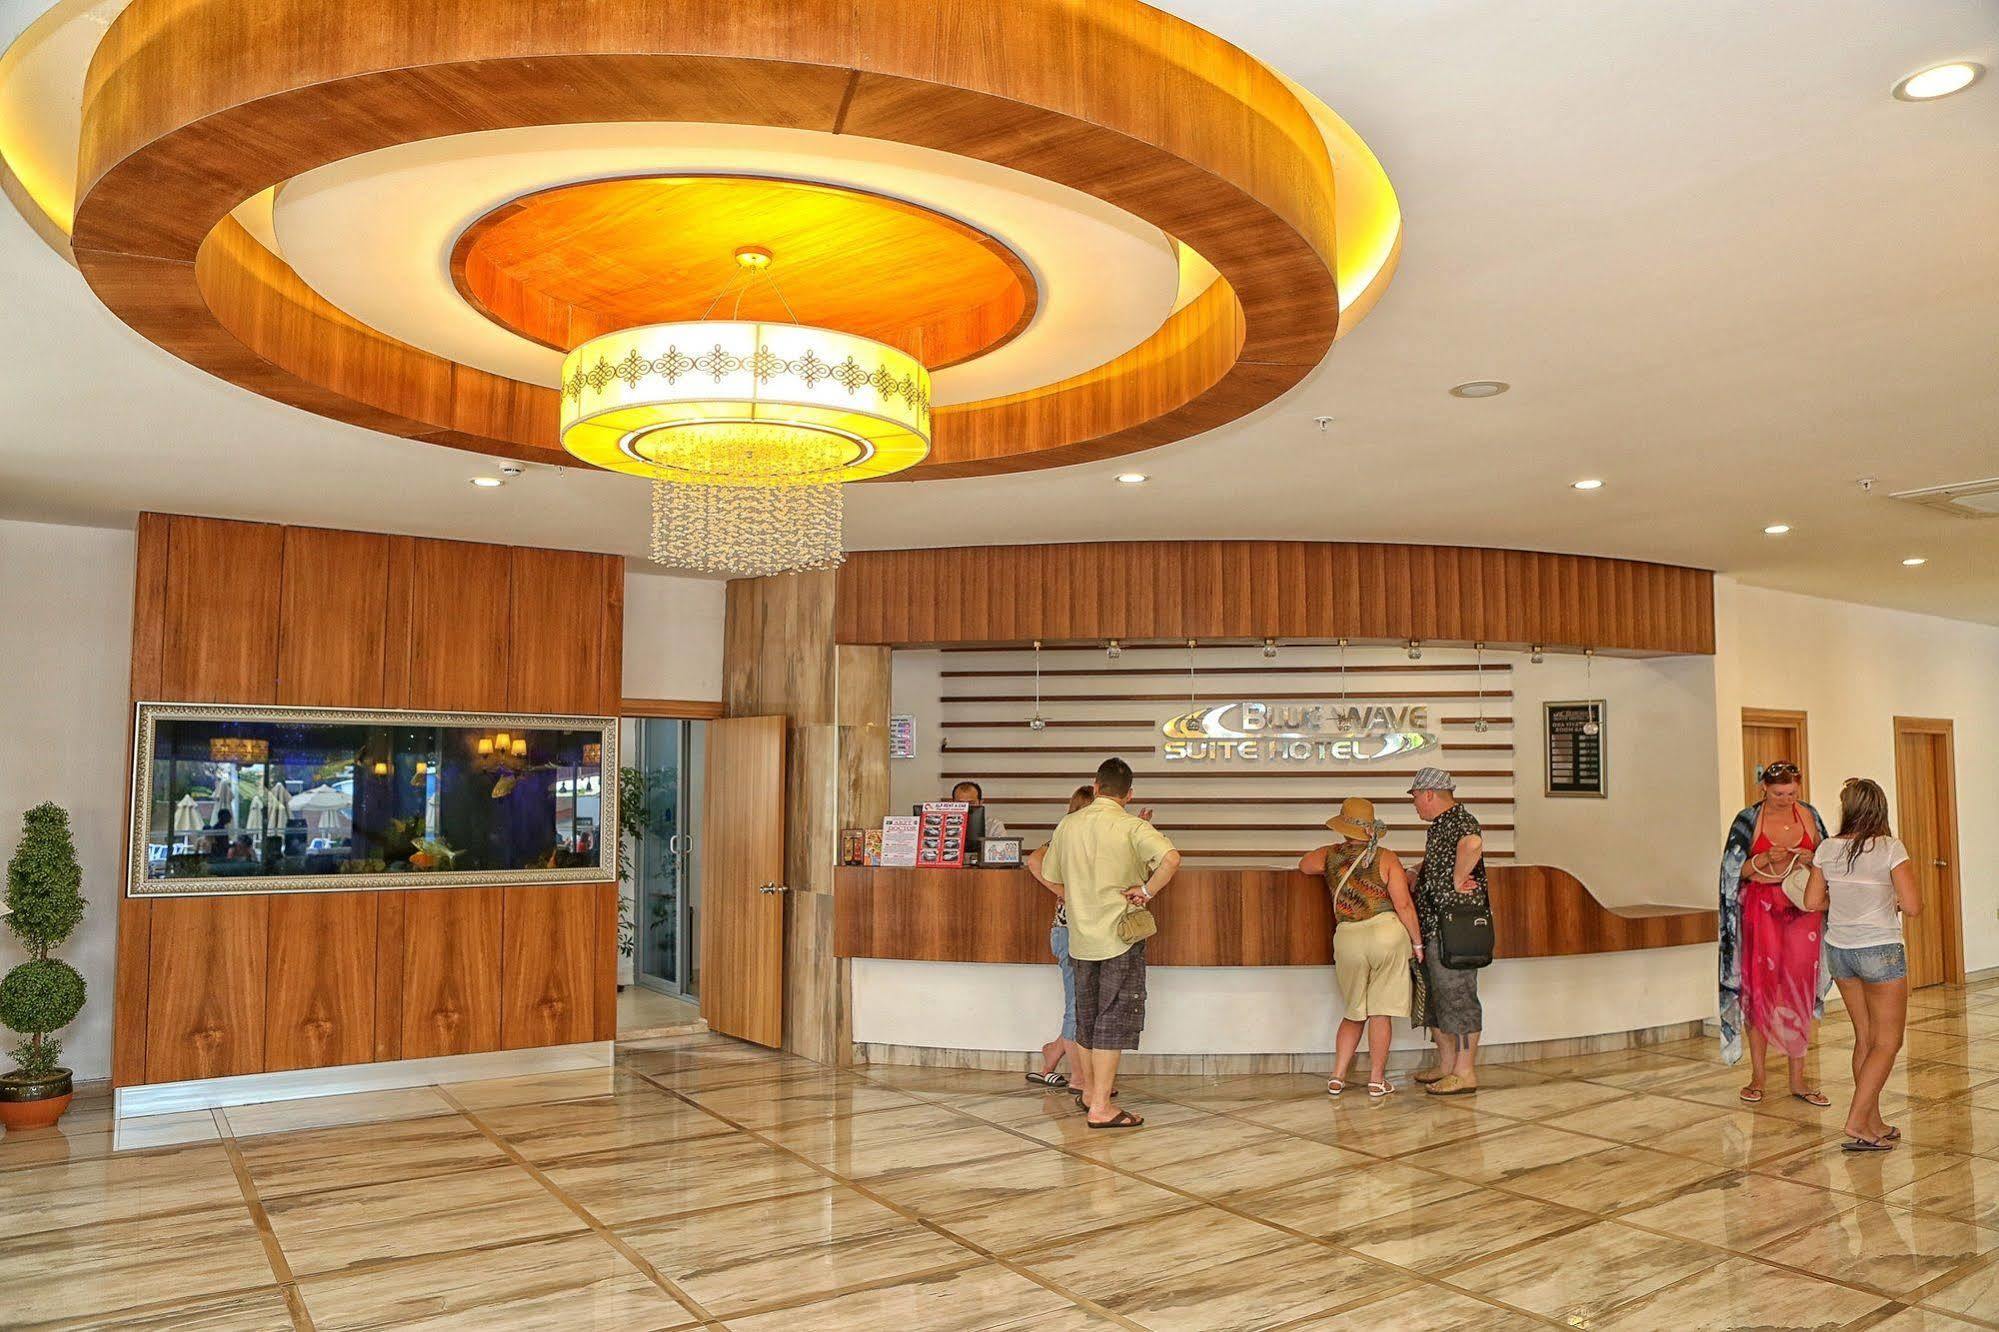 Blue Wave Suite Hotel Alanya Exterior photo